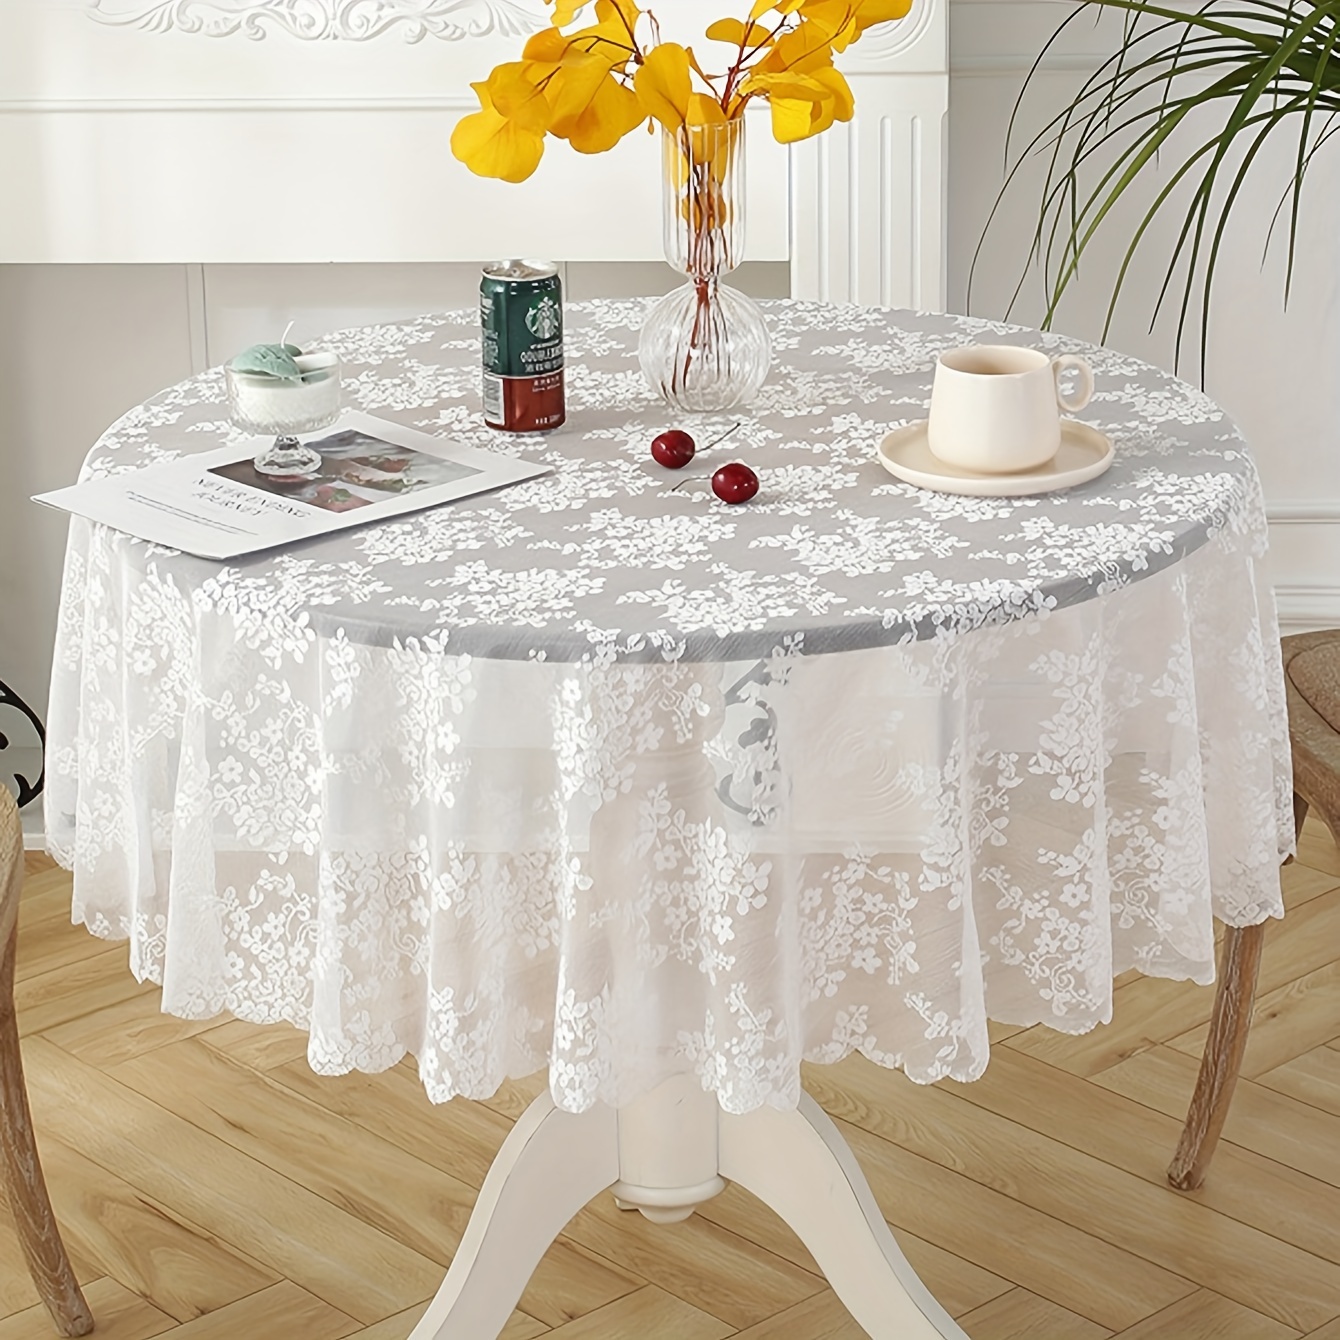 

1pc, Tablecloth, Pure White Romantic Small Grass Flower Knitted Lace Table Cover, Elegant Table Cloth, Room Decoration, Dining Table Decor